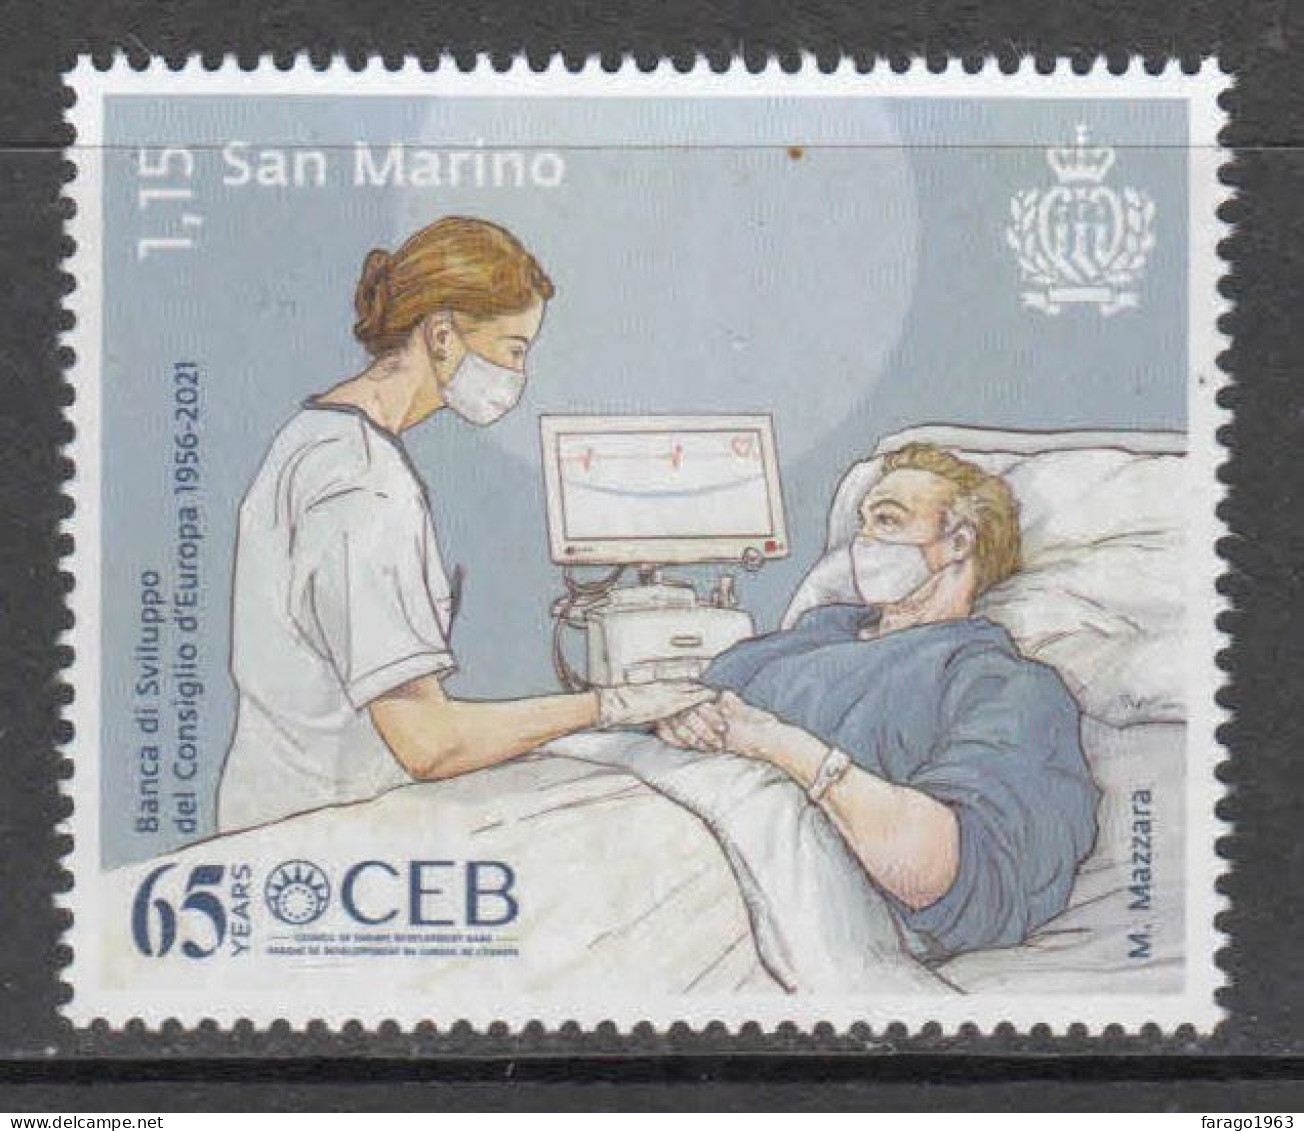 2021 San Marino CEB Development Bank Of Europe Health Nurse COVID Complete Set Of 1 MNH @ BELOW FACE VALUE - Unused Stamps